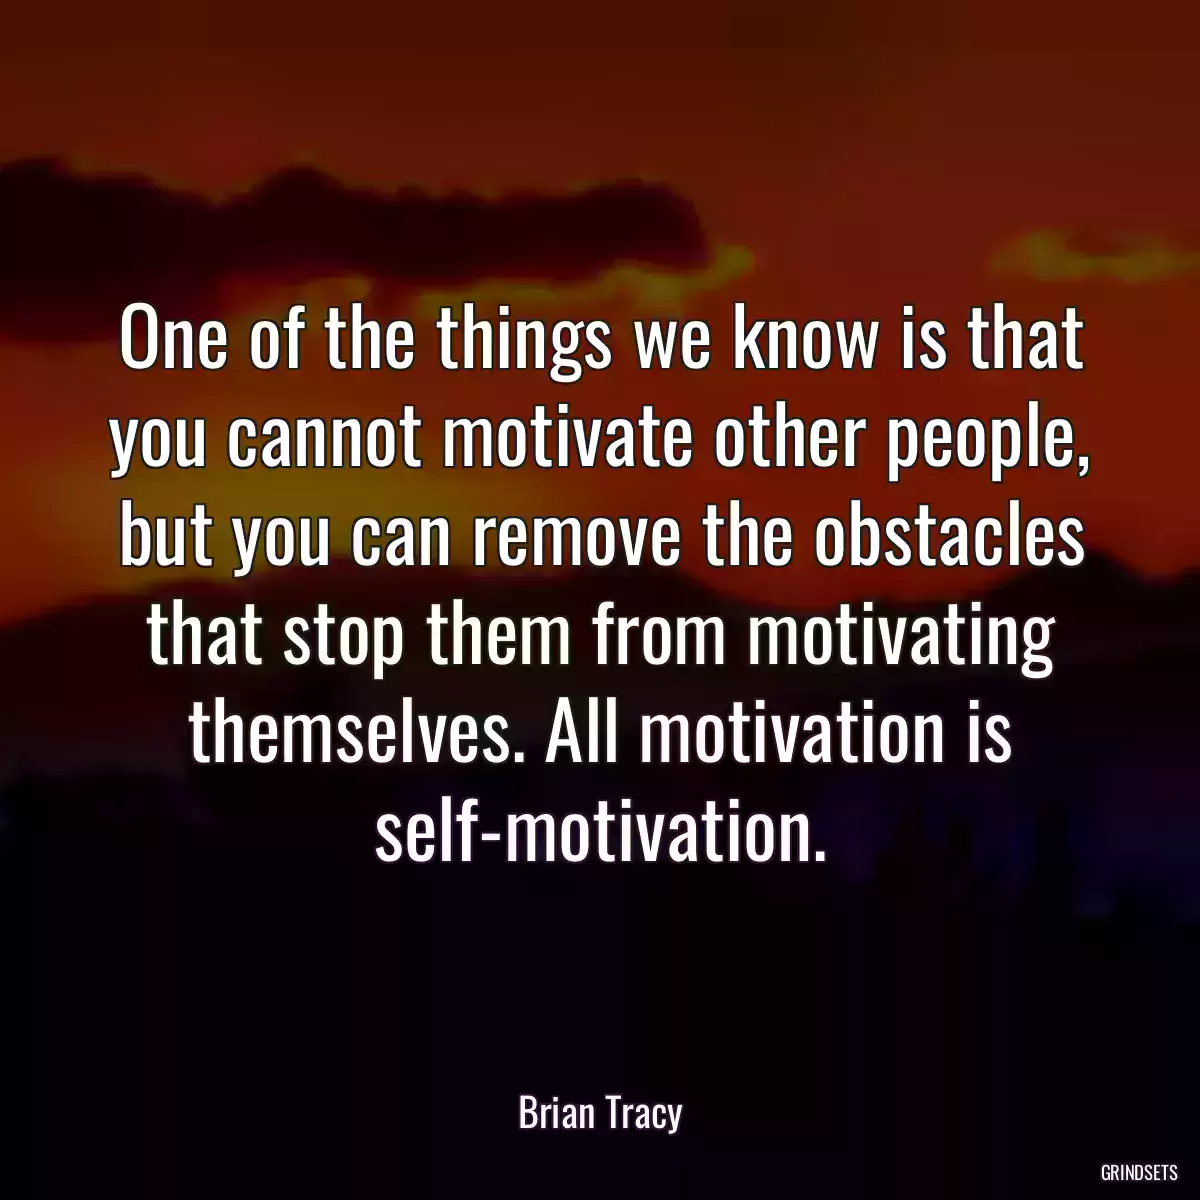 One of the things we know is that you cannot motivate other people, but you can remove the obstacles that stop them from motivating themselves. All motivation is self-motivation.